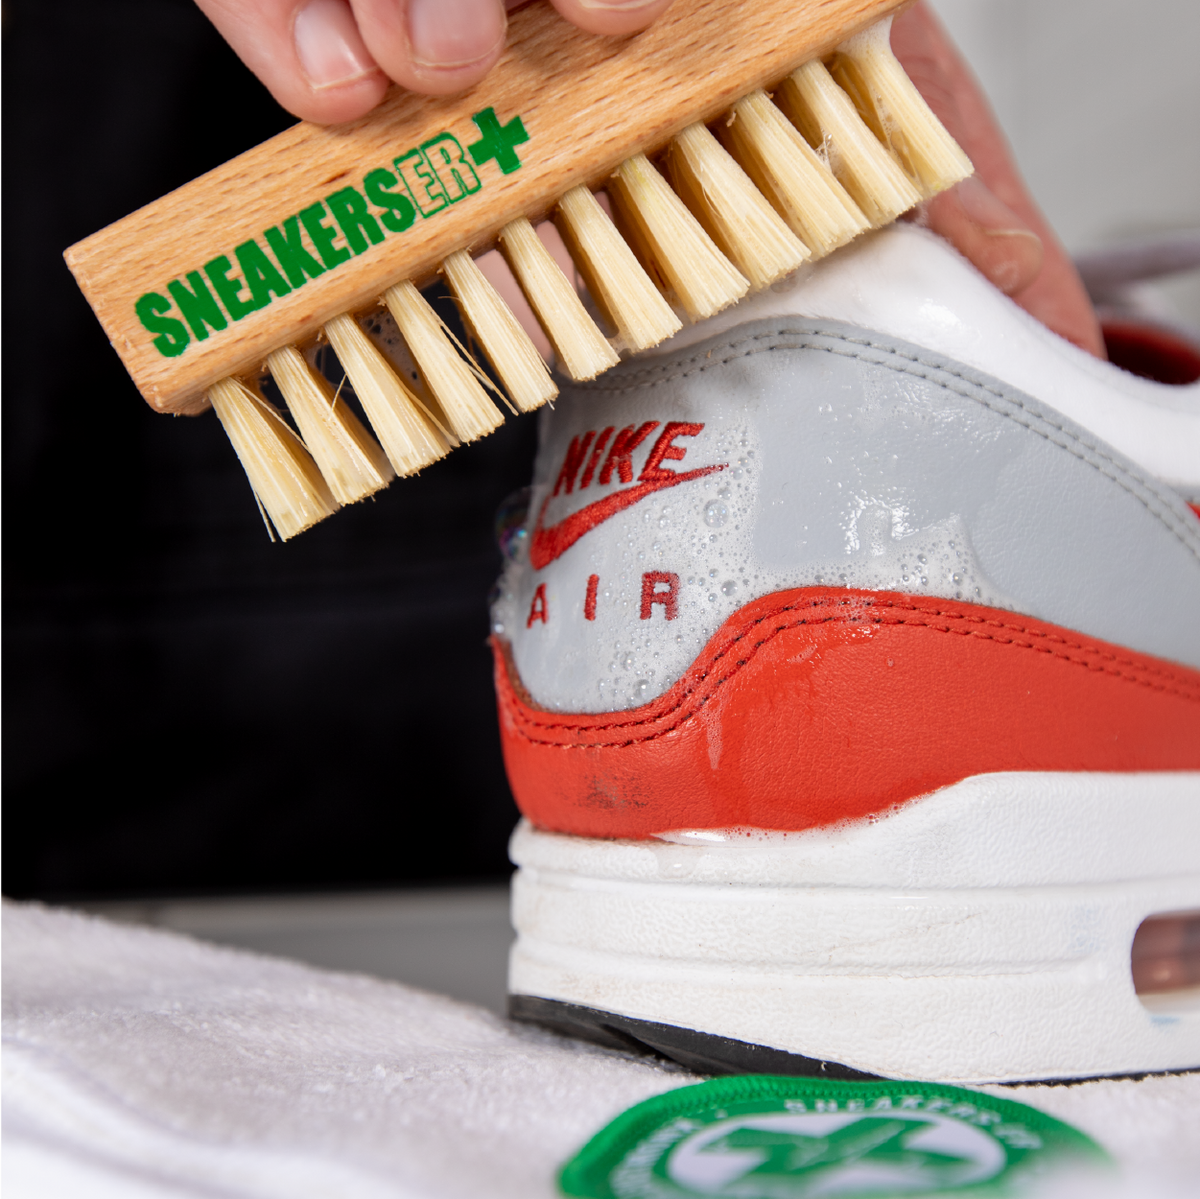 SNEAKERS ER CLEAN &amp; PROTECT SNEAKER CARE KIT 5 PIECE